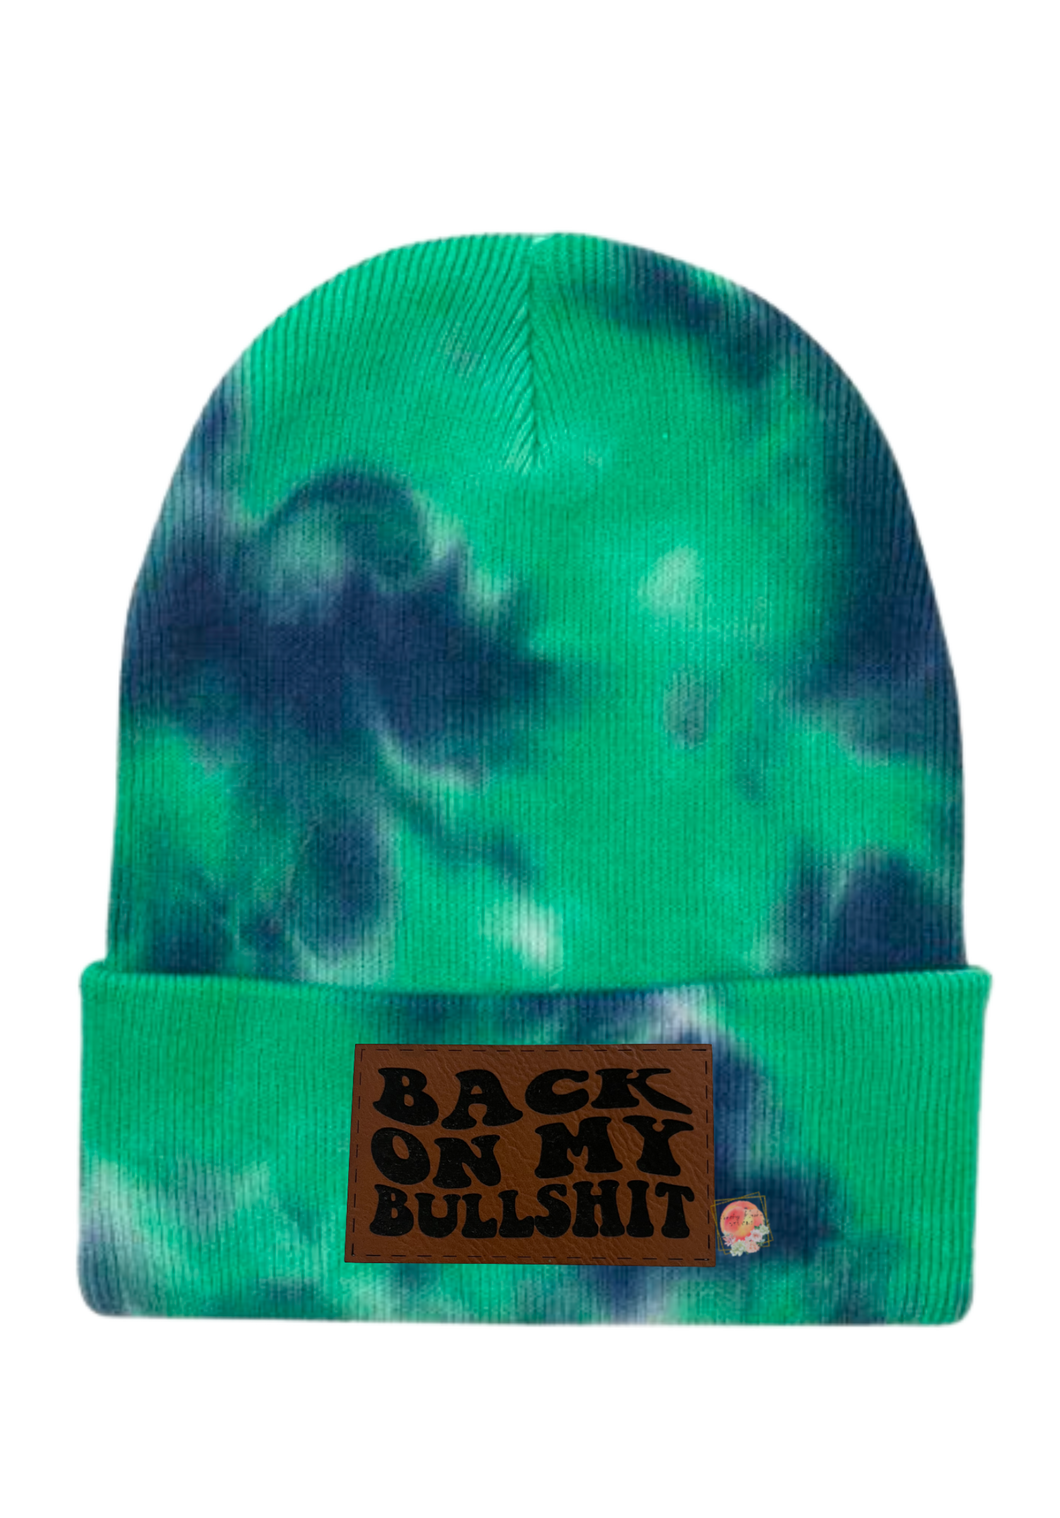 Back on my bullshit leather patch beanie/hat